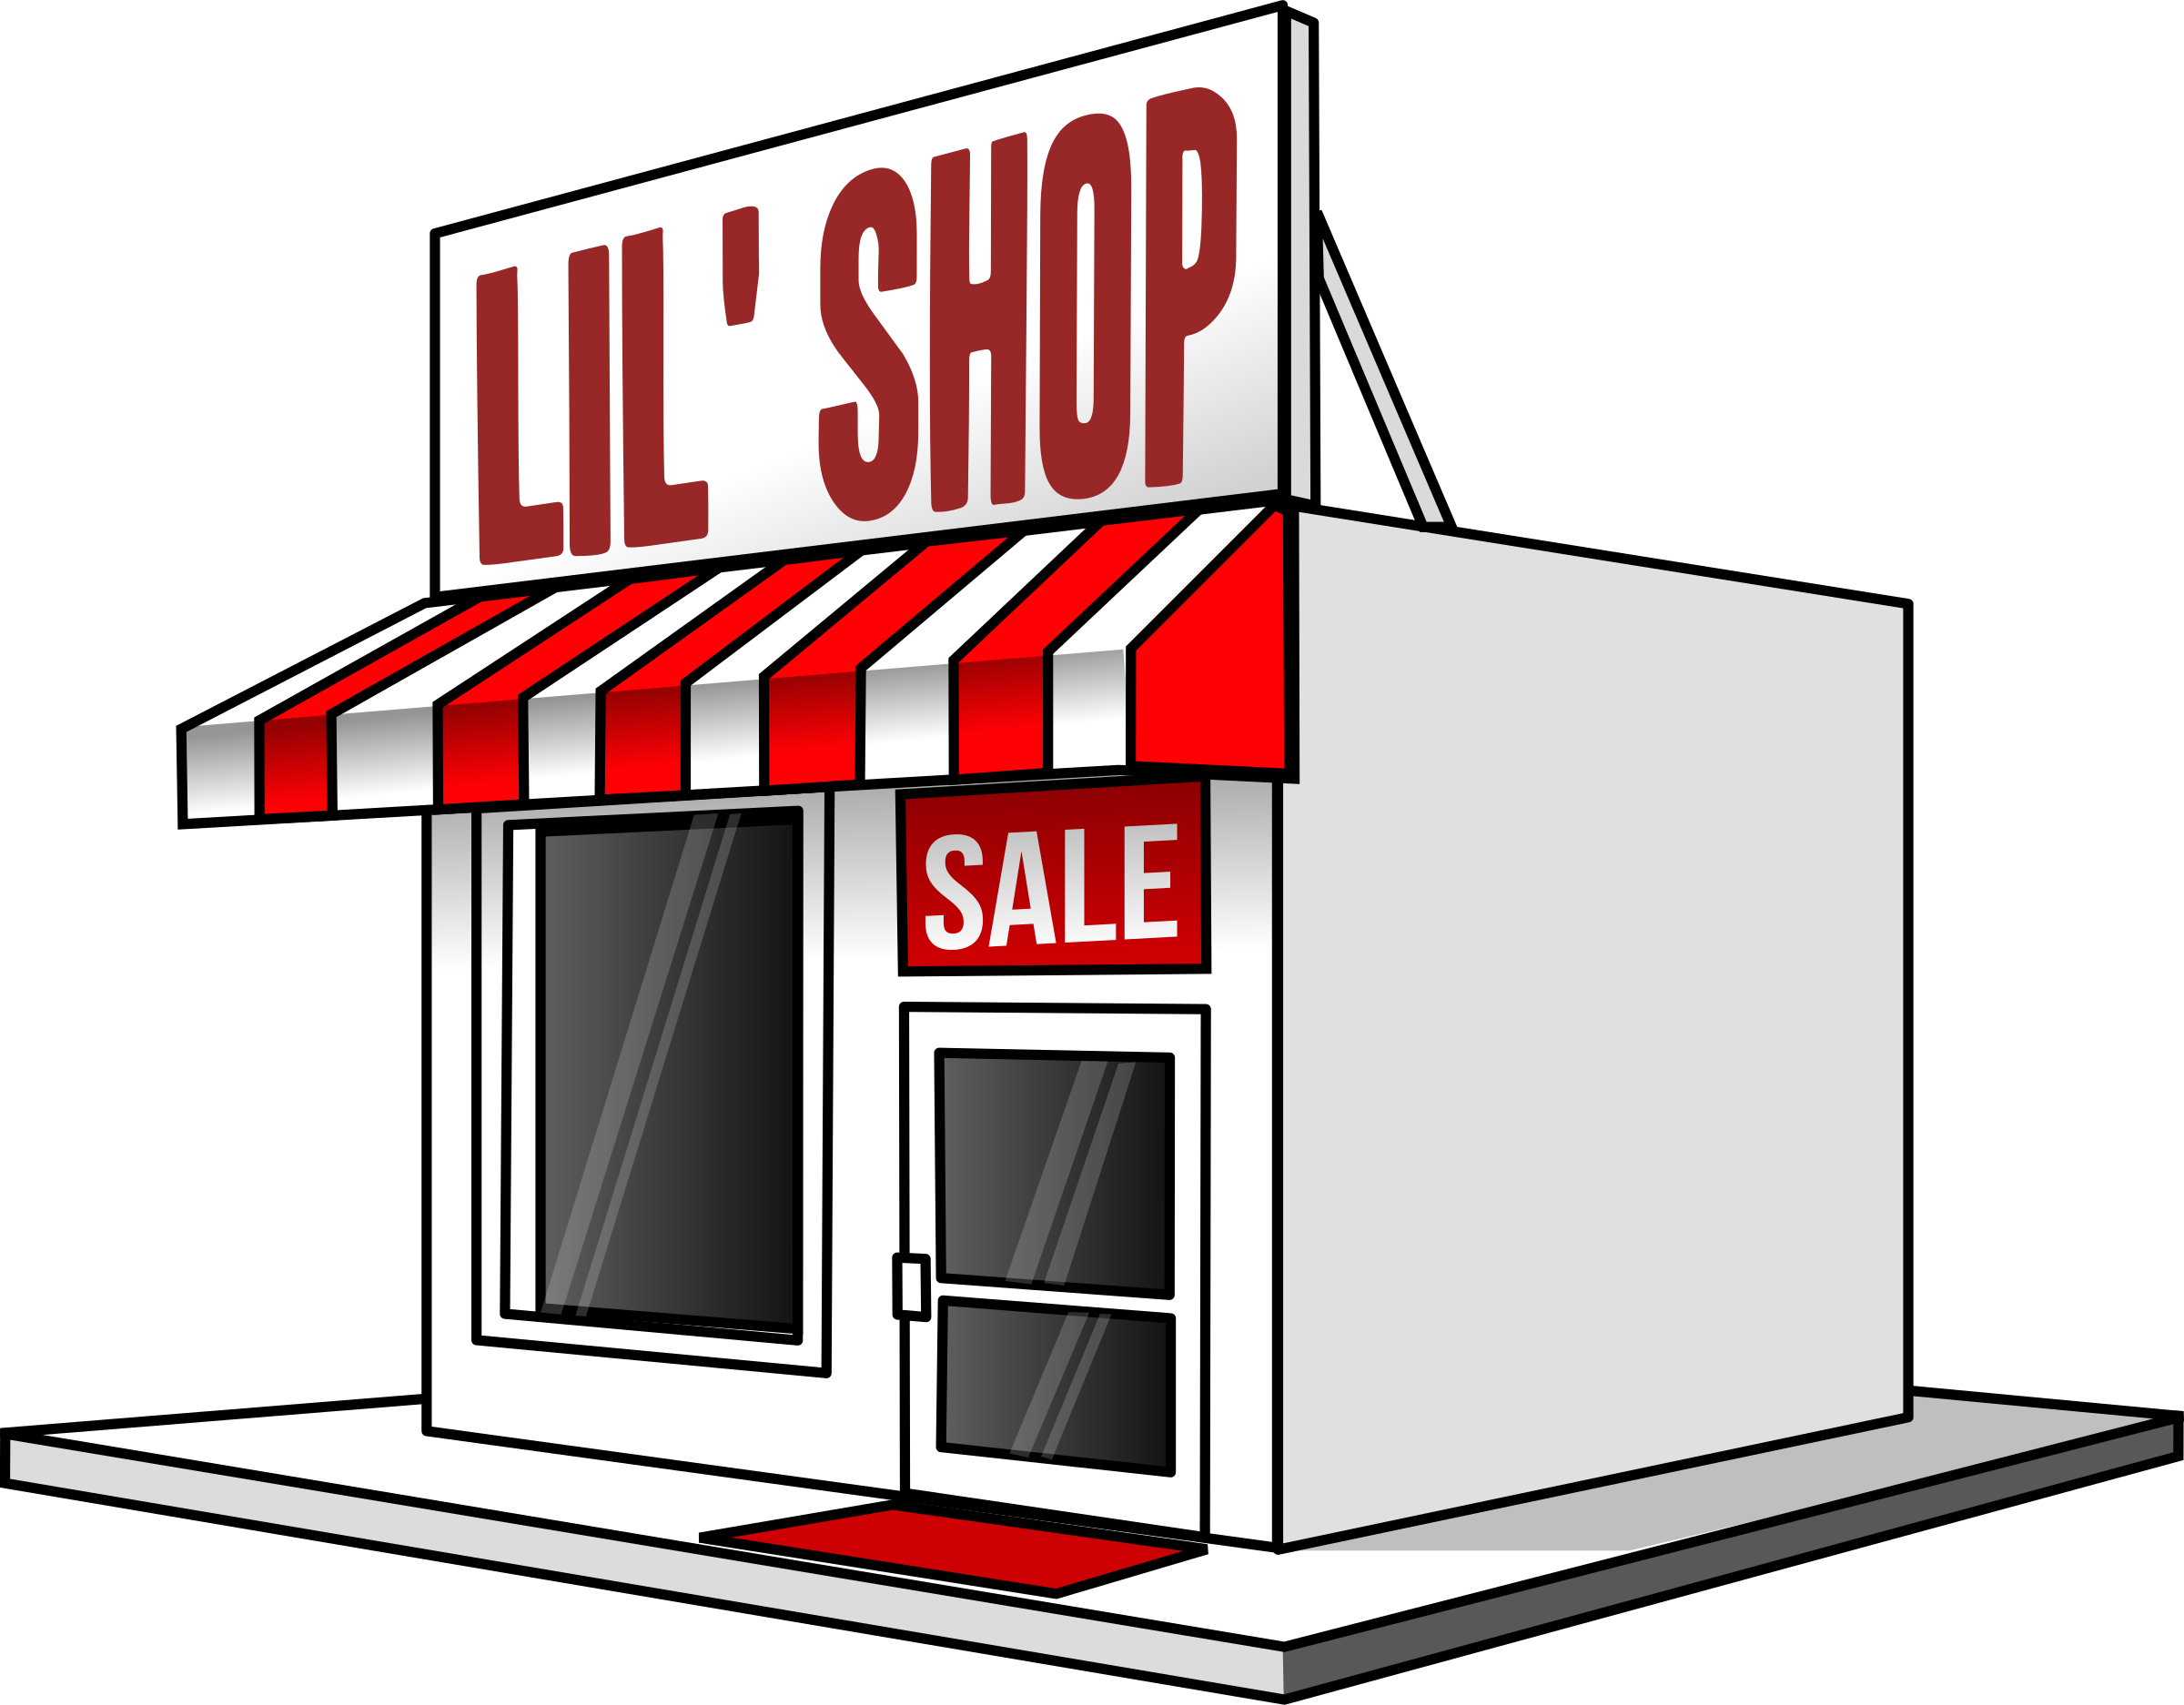 With Sign Fixed - Small Business Clipart (2400x1874)